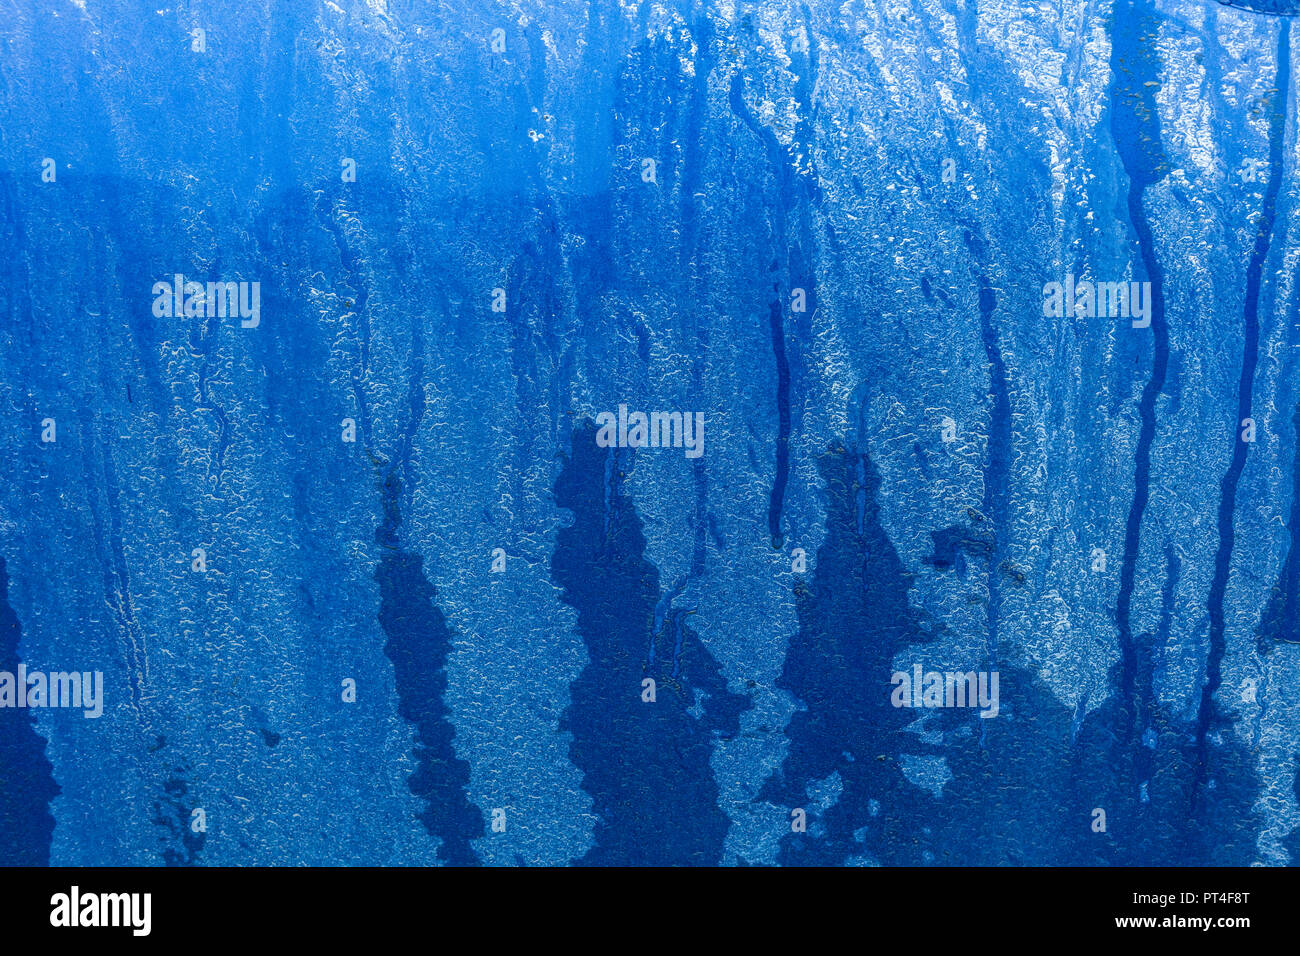 Artistic abstract of dirt with water streaks on a blue background Stock Photo